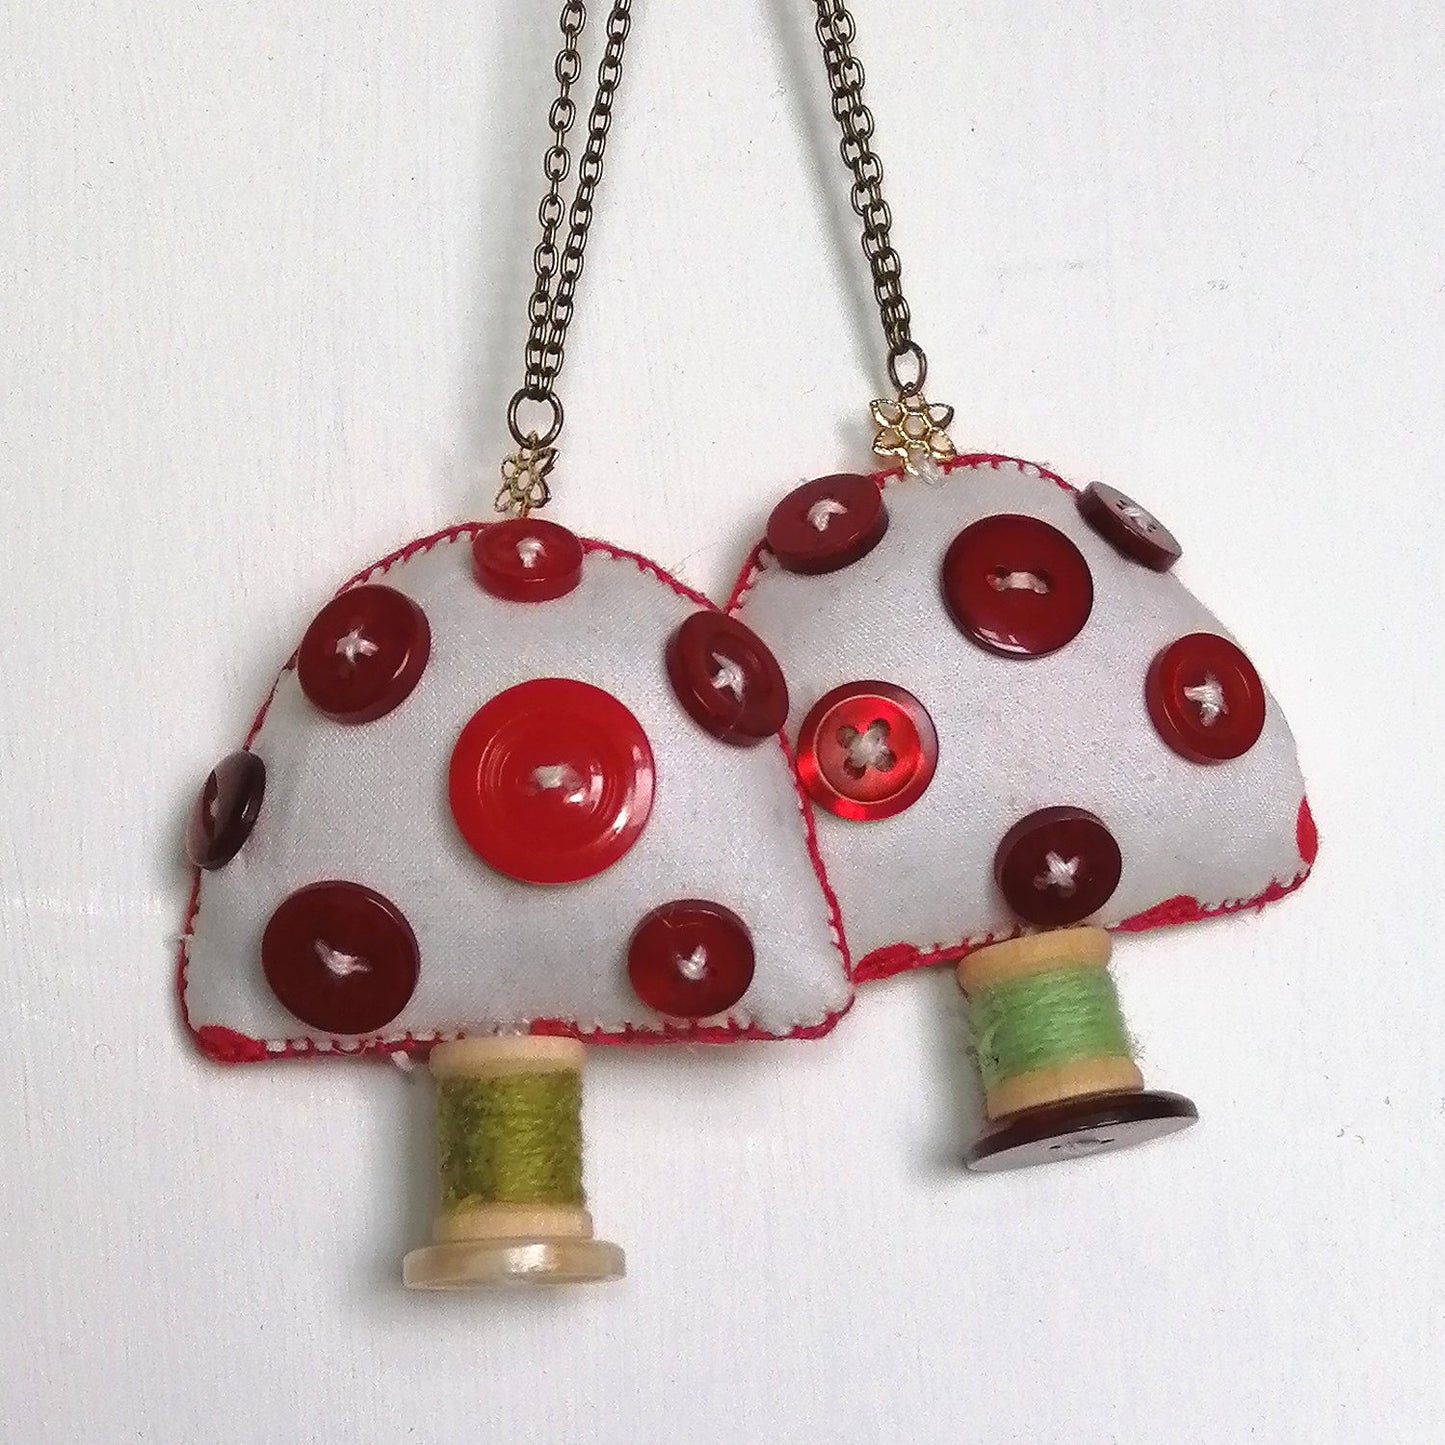 White Fabric toadstool ornament with red buttons and wooden spool.